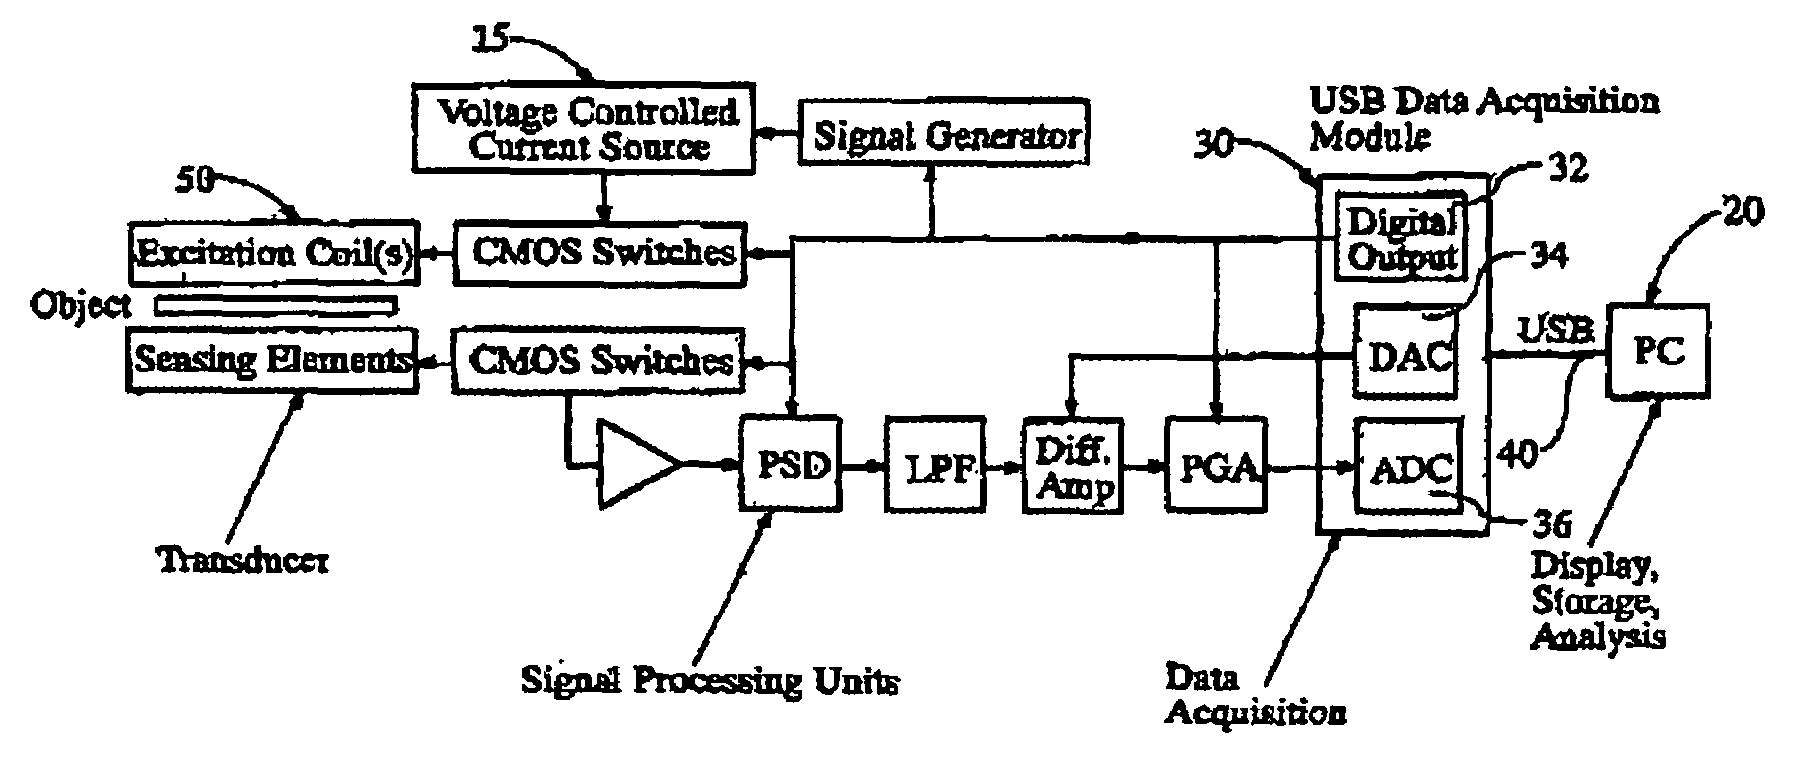 Security scanners with capacitance and magnetic sensor arrays